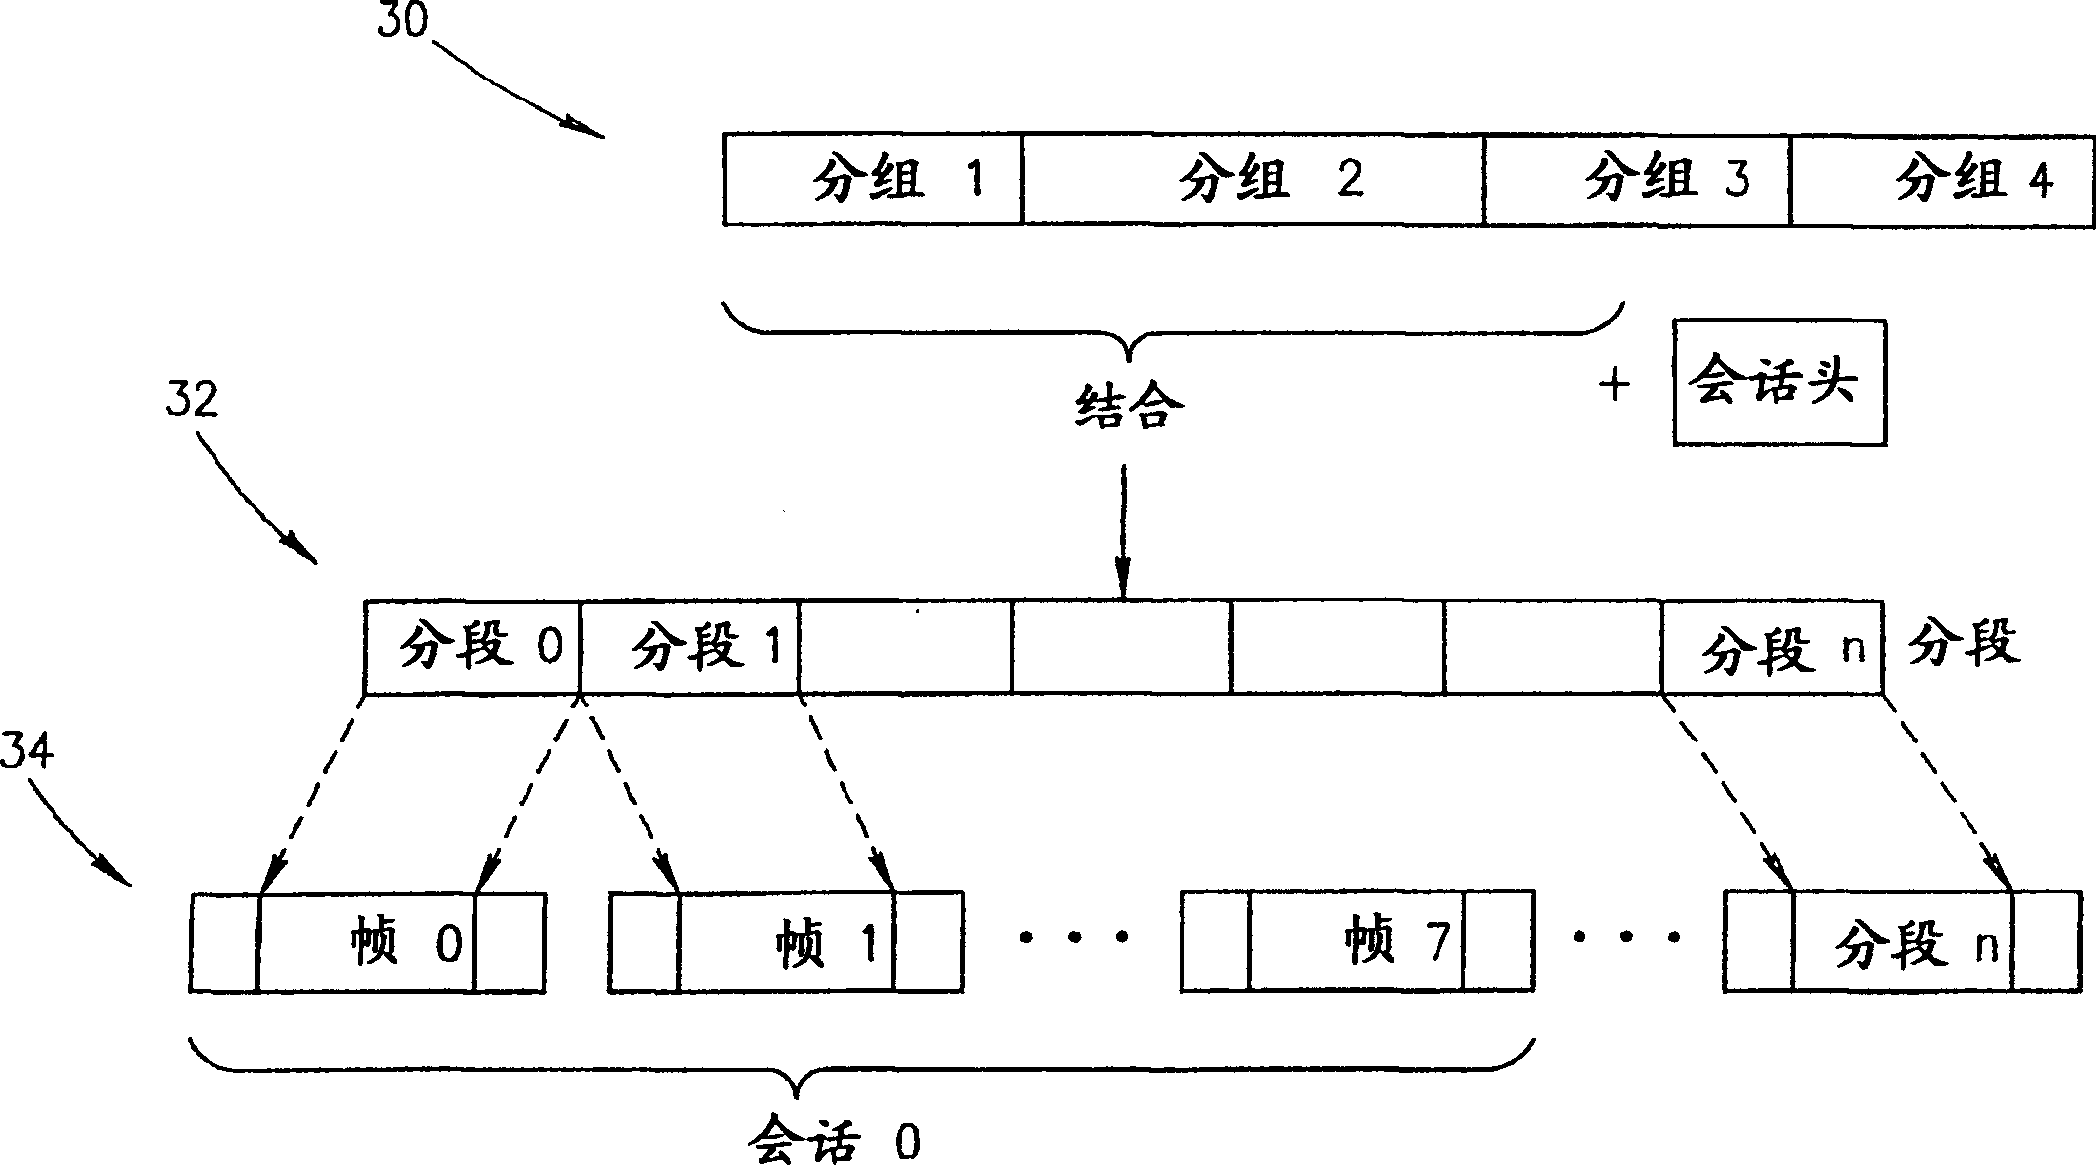 Channel access method for power line carrier based media access control protocol